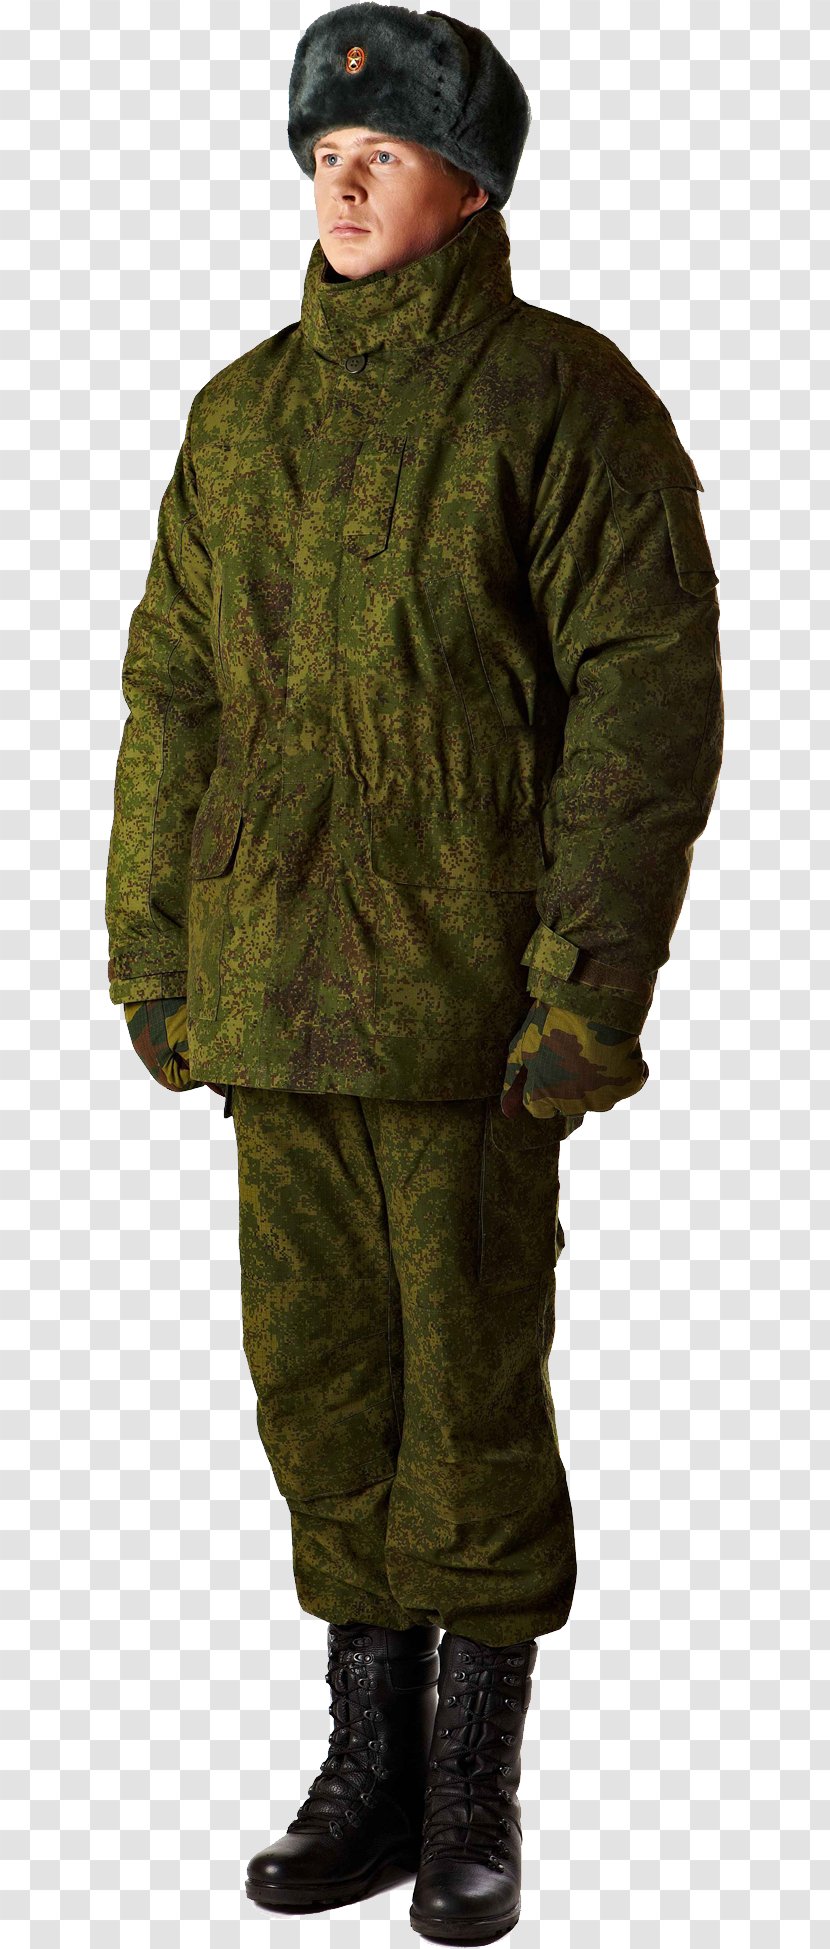 Russian Armed Forces Soldier Army Military - Non Commissioned Officer - Russia Transparent PNG